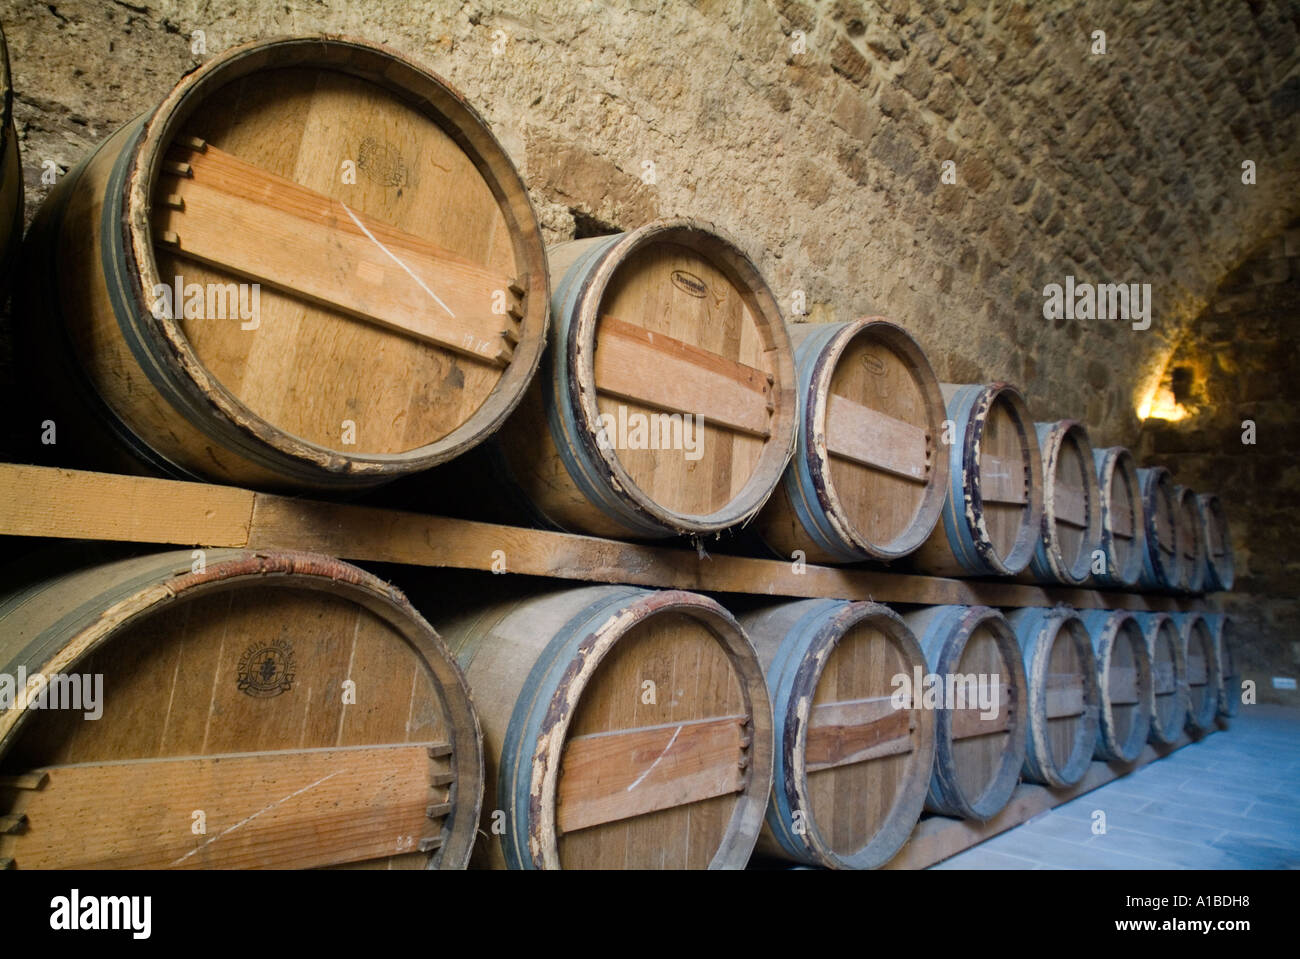 Rows of wooden wine barrels in the cellar of a castle, Cazeneuve, Gers, France. Stock Photo